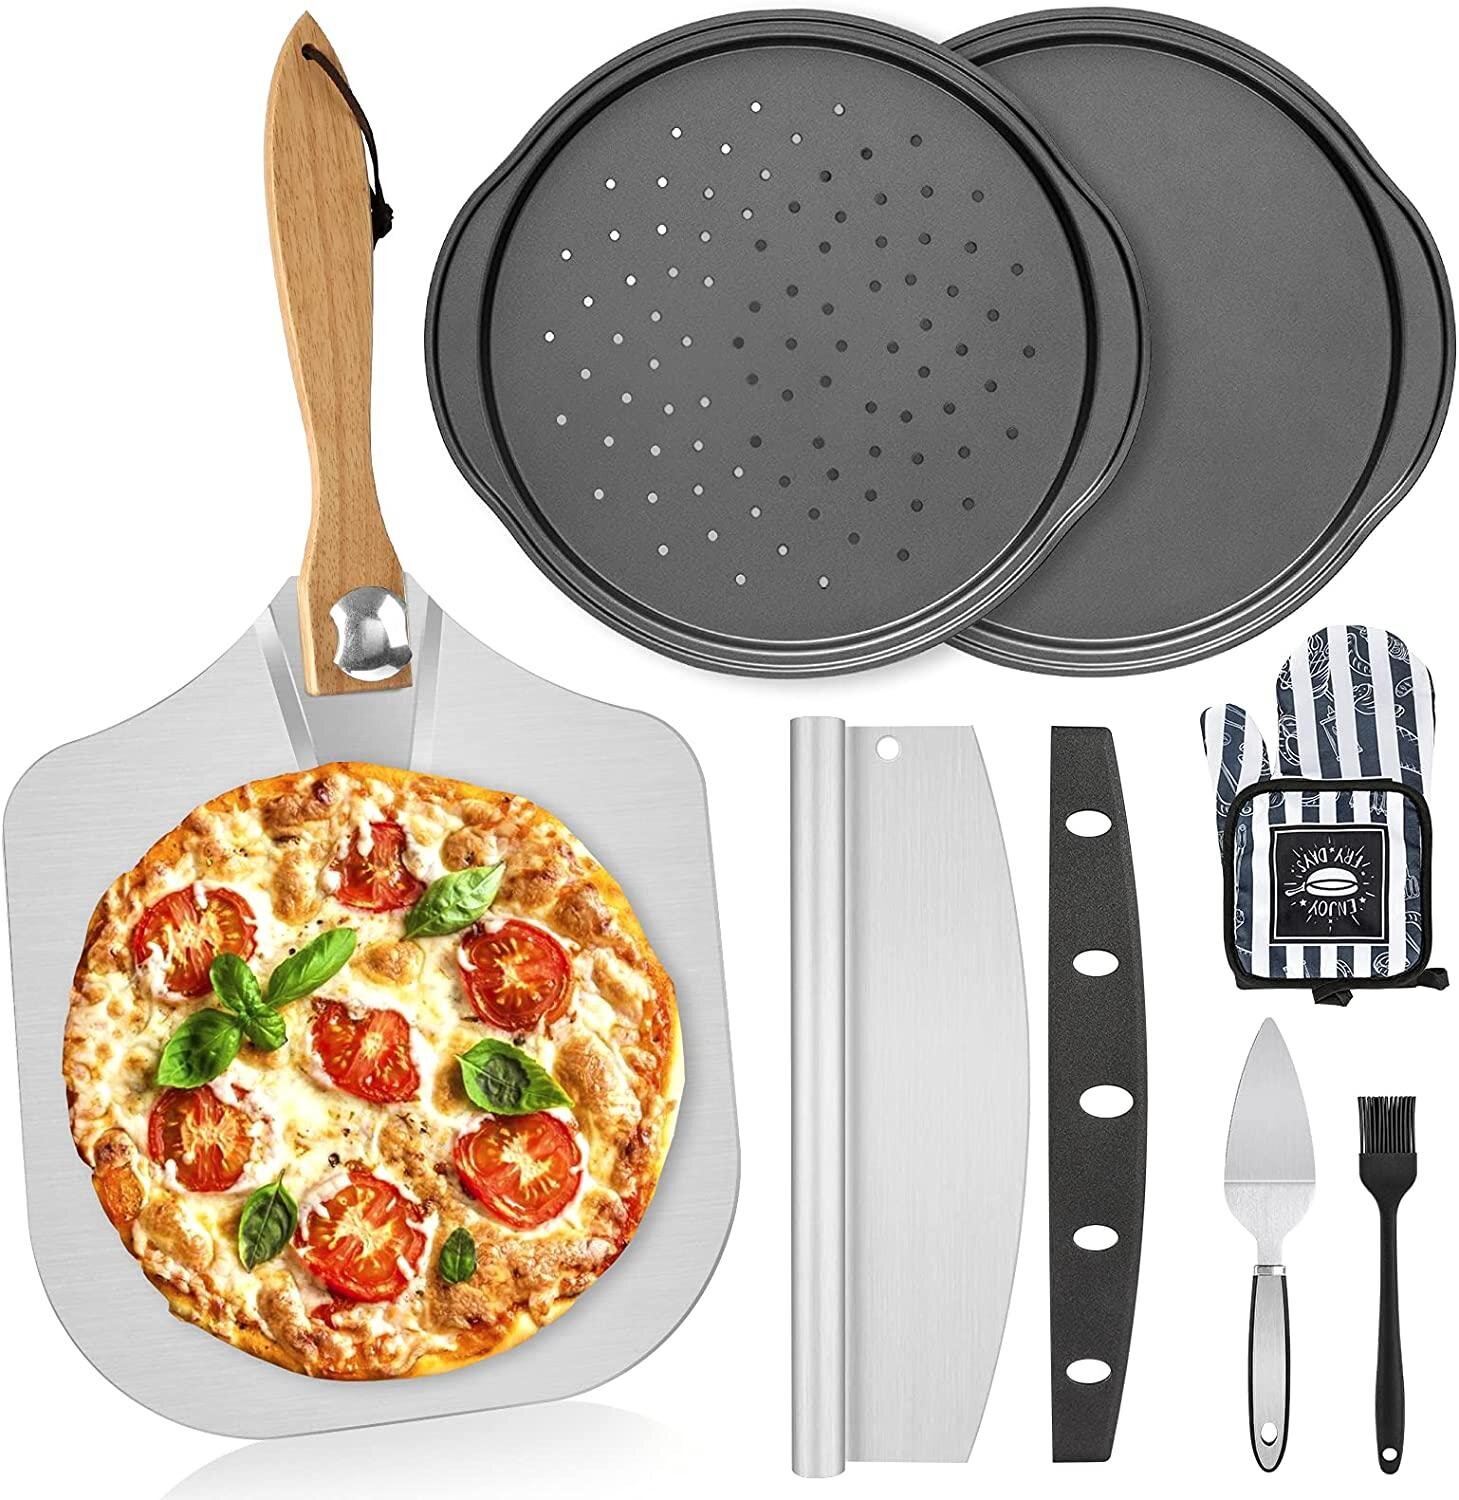 Beheren Maak een naam kathedraal GoodDogHousehold 7PCS Foldable Pizza Peel Pizza Pan Set,12" X 14" Aluminum  Metal Pizza Paddle With Wooden Handle, Rocker Cutter, Server Set, Baking  Oven Mitts, Oil Brushes, Homemade Pizza Oven Accessories | Wayfair